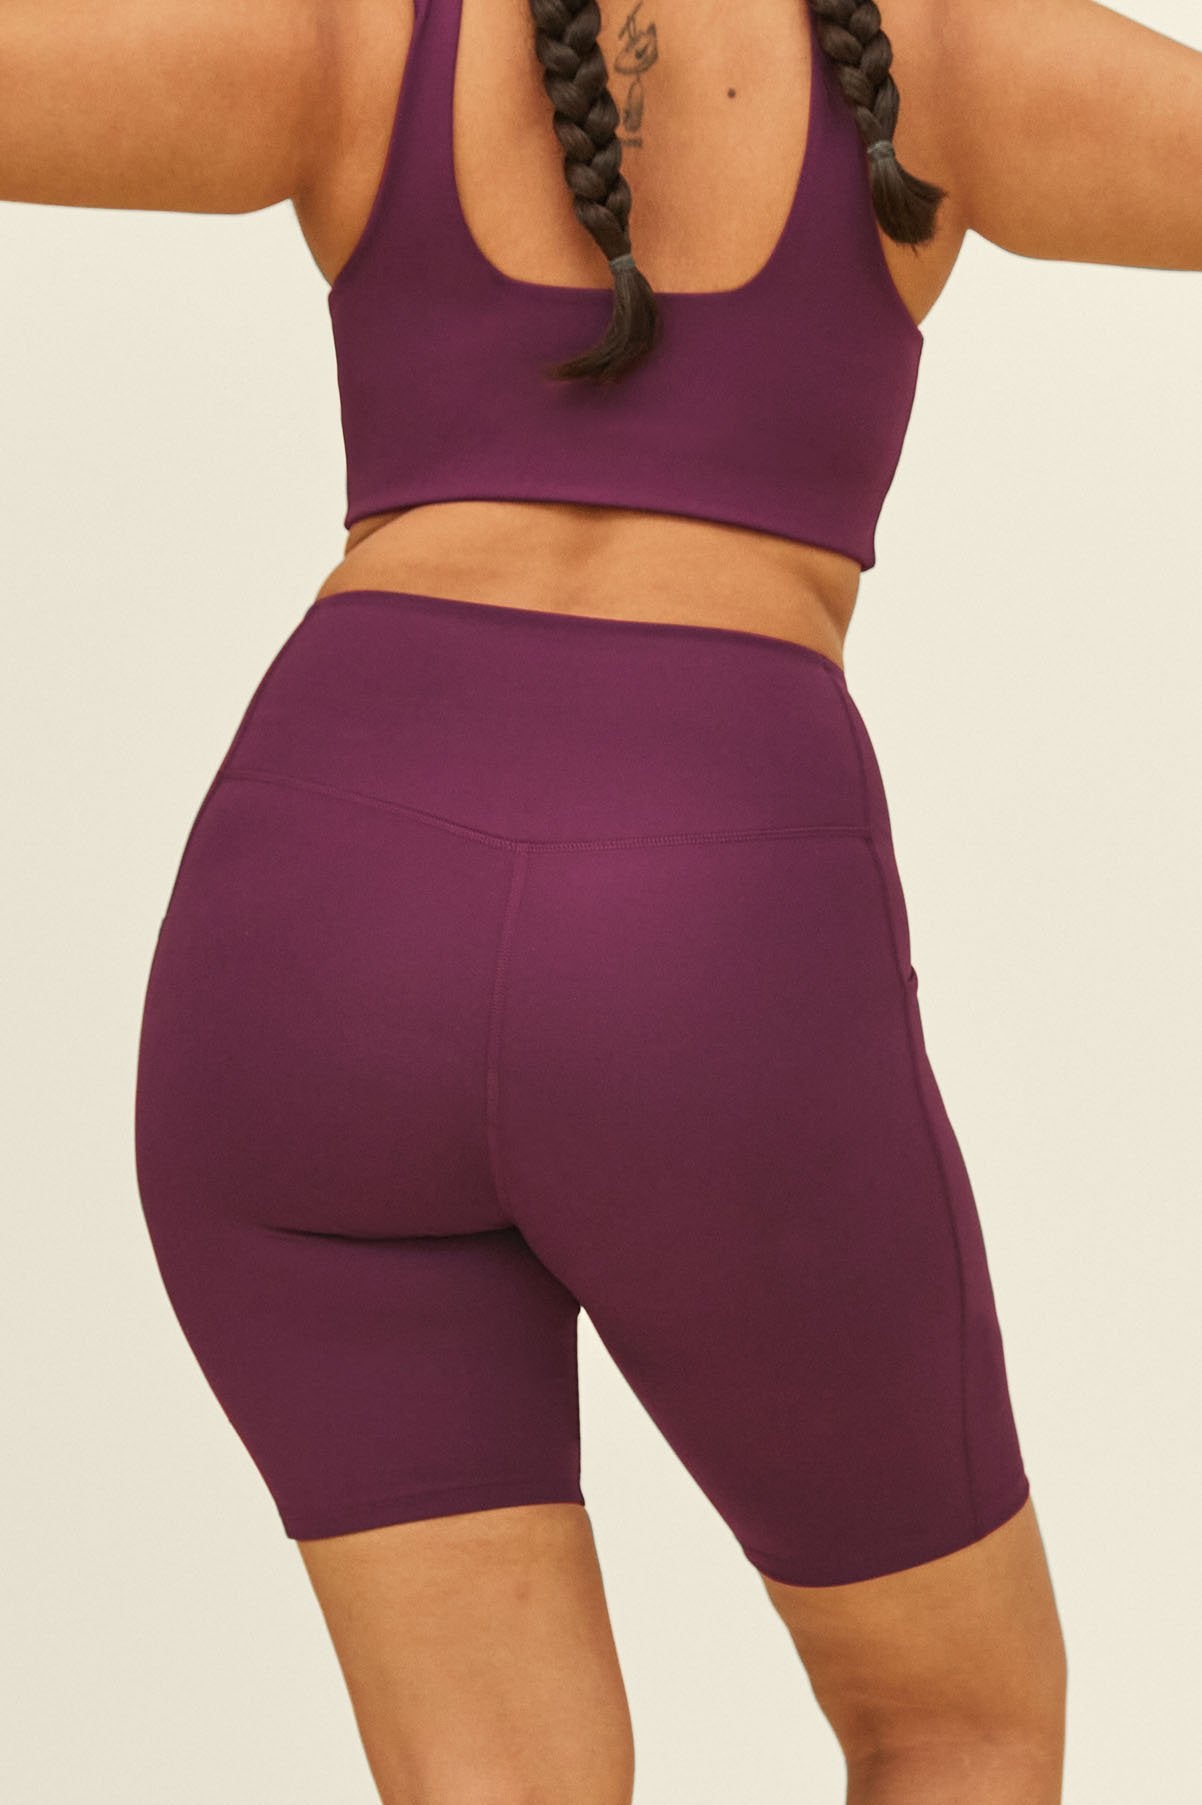 Girlfriend Collective Plum High-Rise Bike Shorts Small - $30 - From Julie